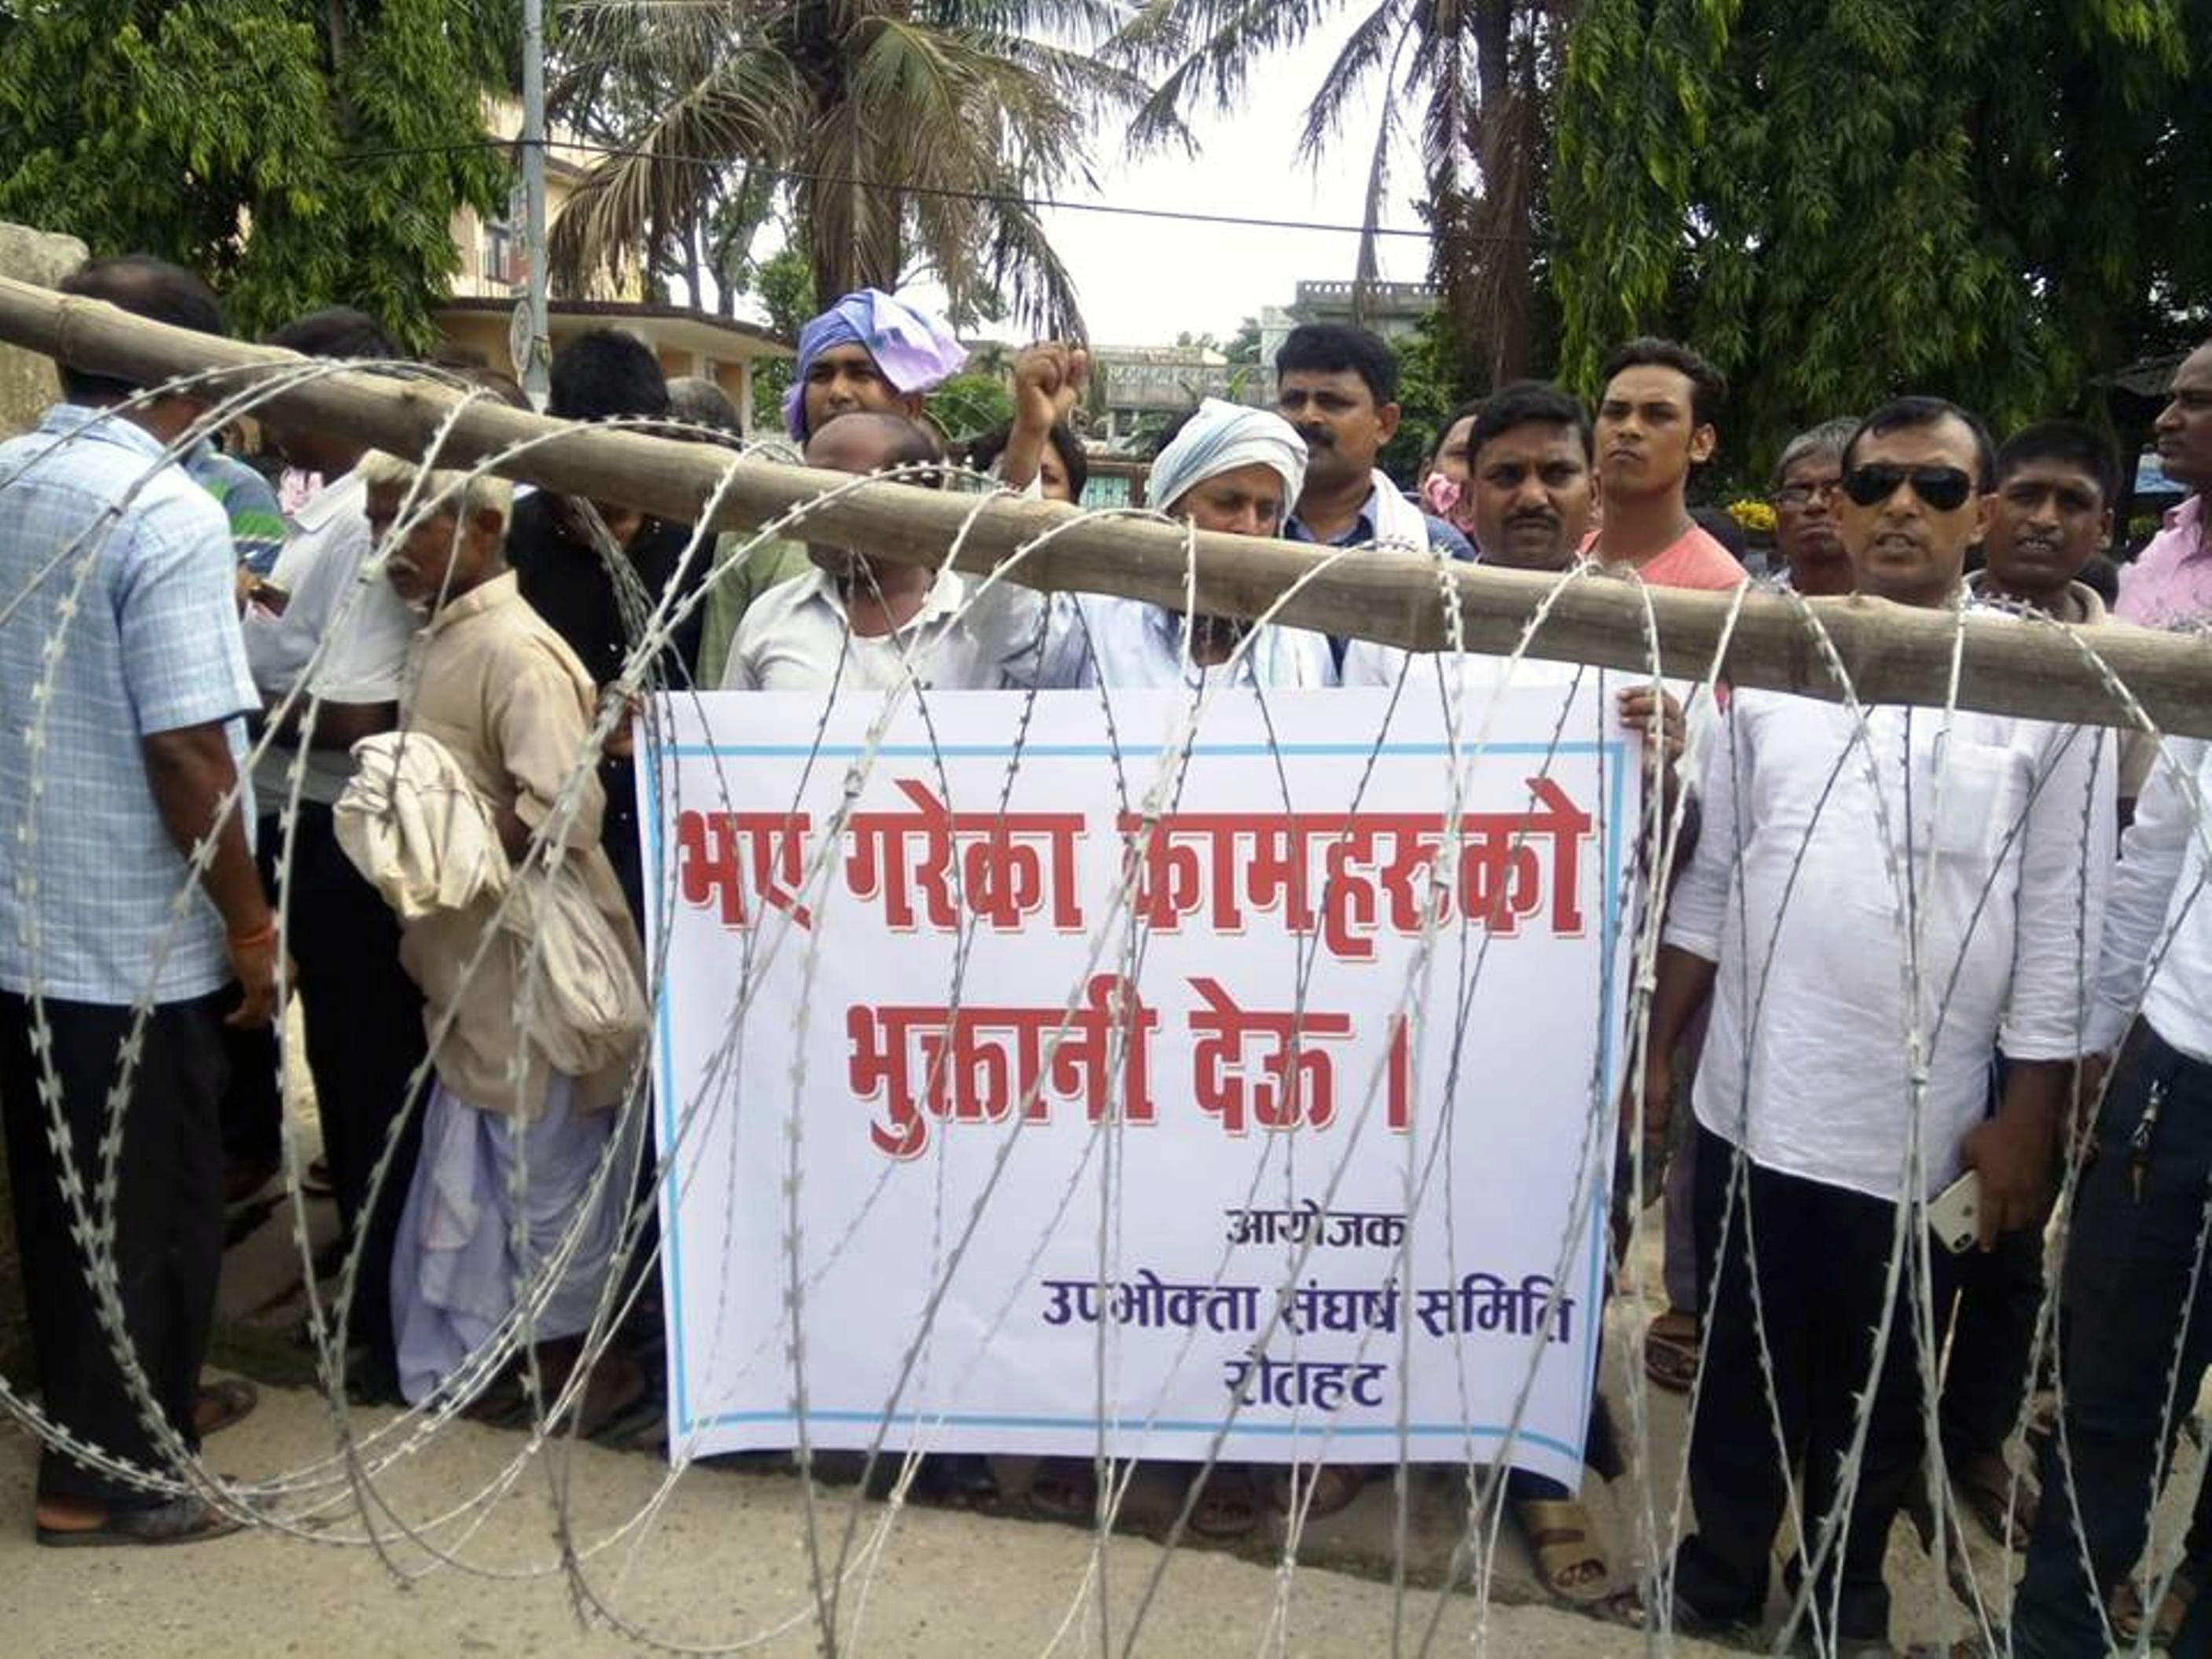 Representatives of consumers struggle committee picket the District Technical Office, Gaur on Wednesday, July 11, 2018. Photo: Prabhat Kumar Jha